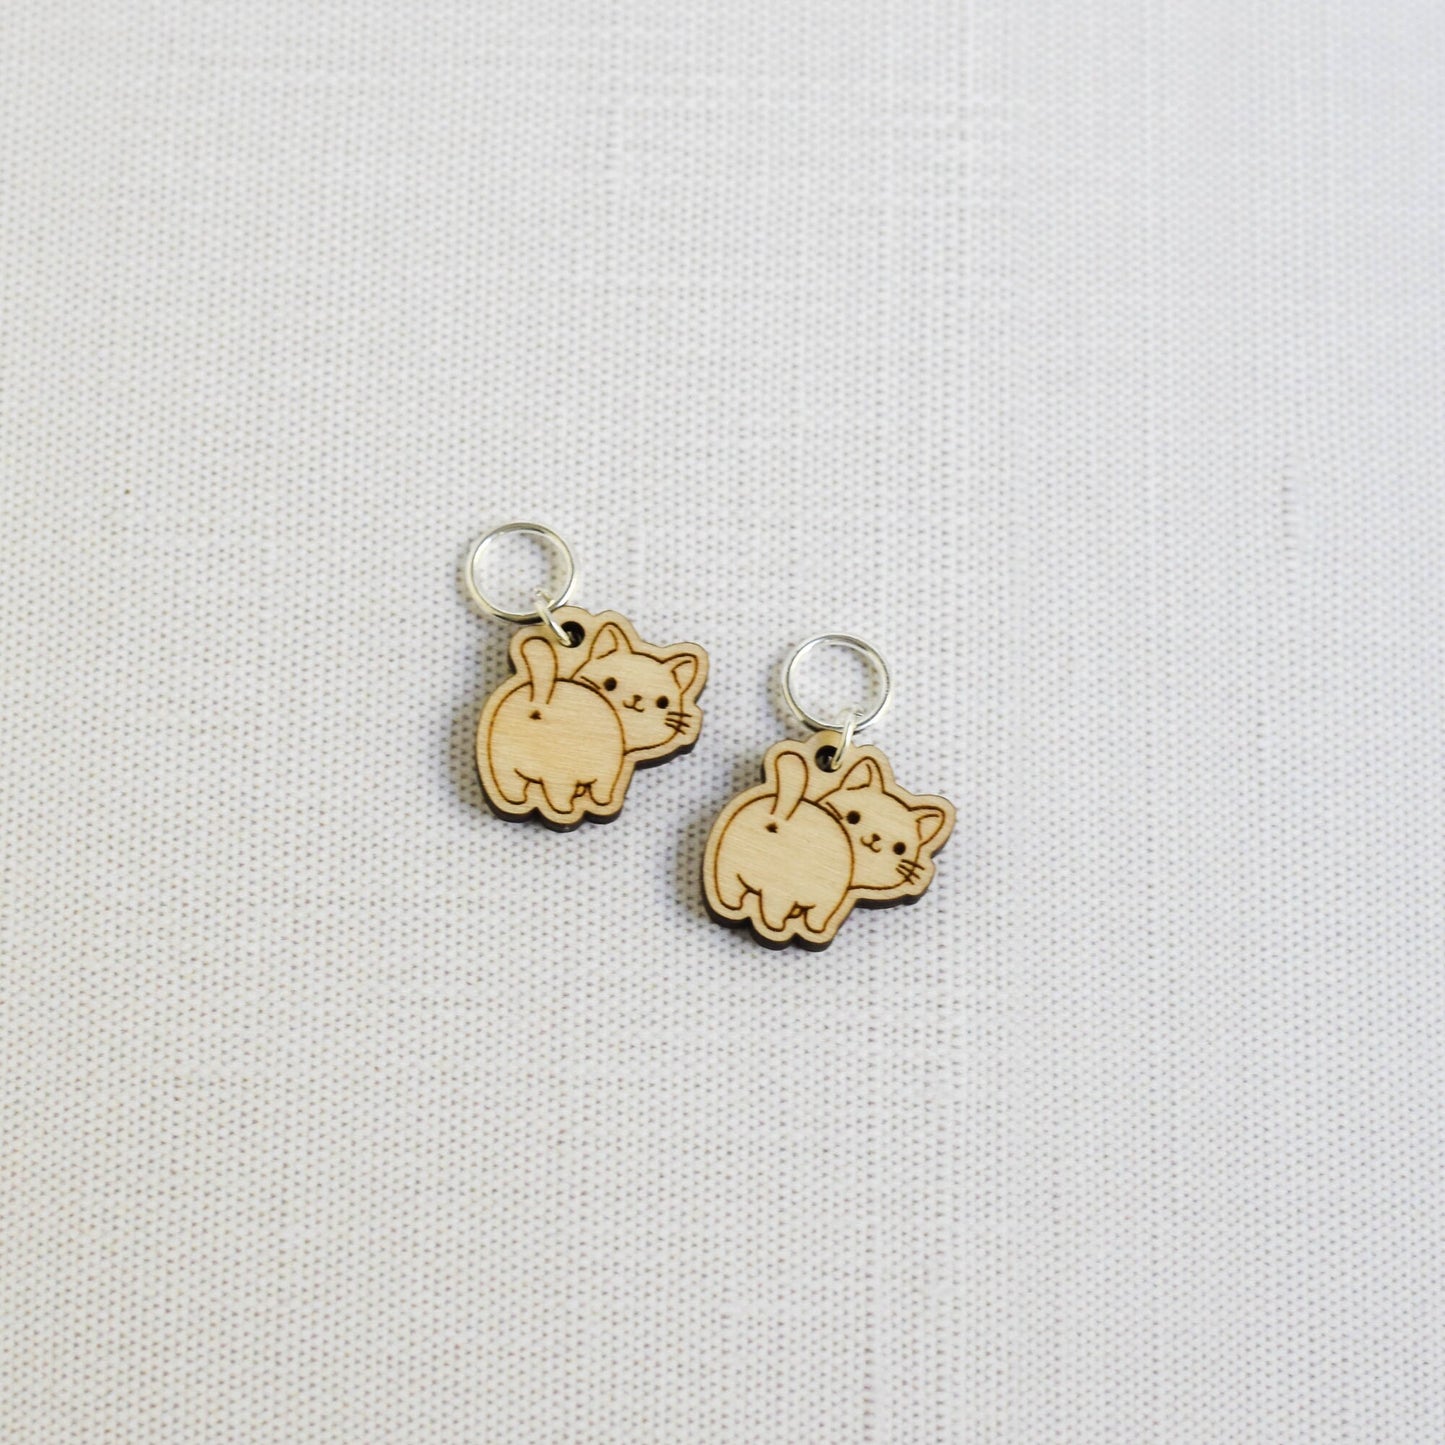 Set of 2 Laser Engraved Stitch Markers - Cat Butts